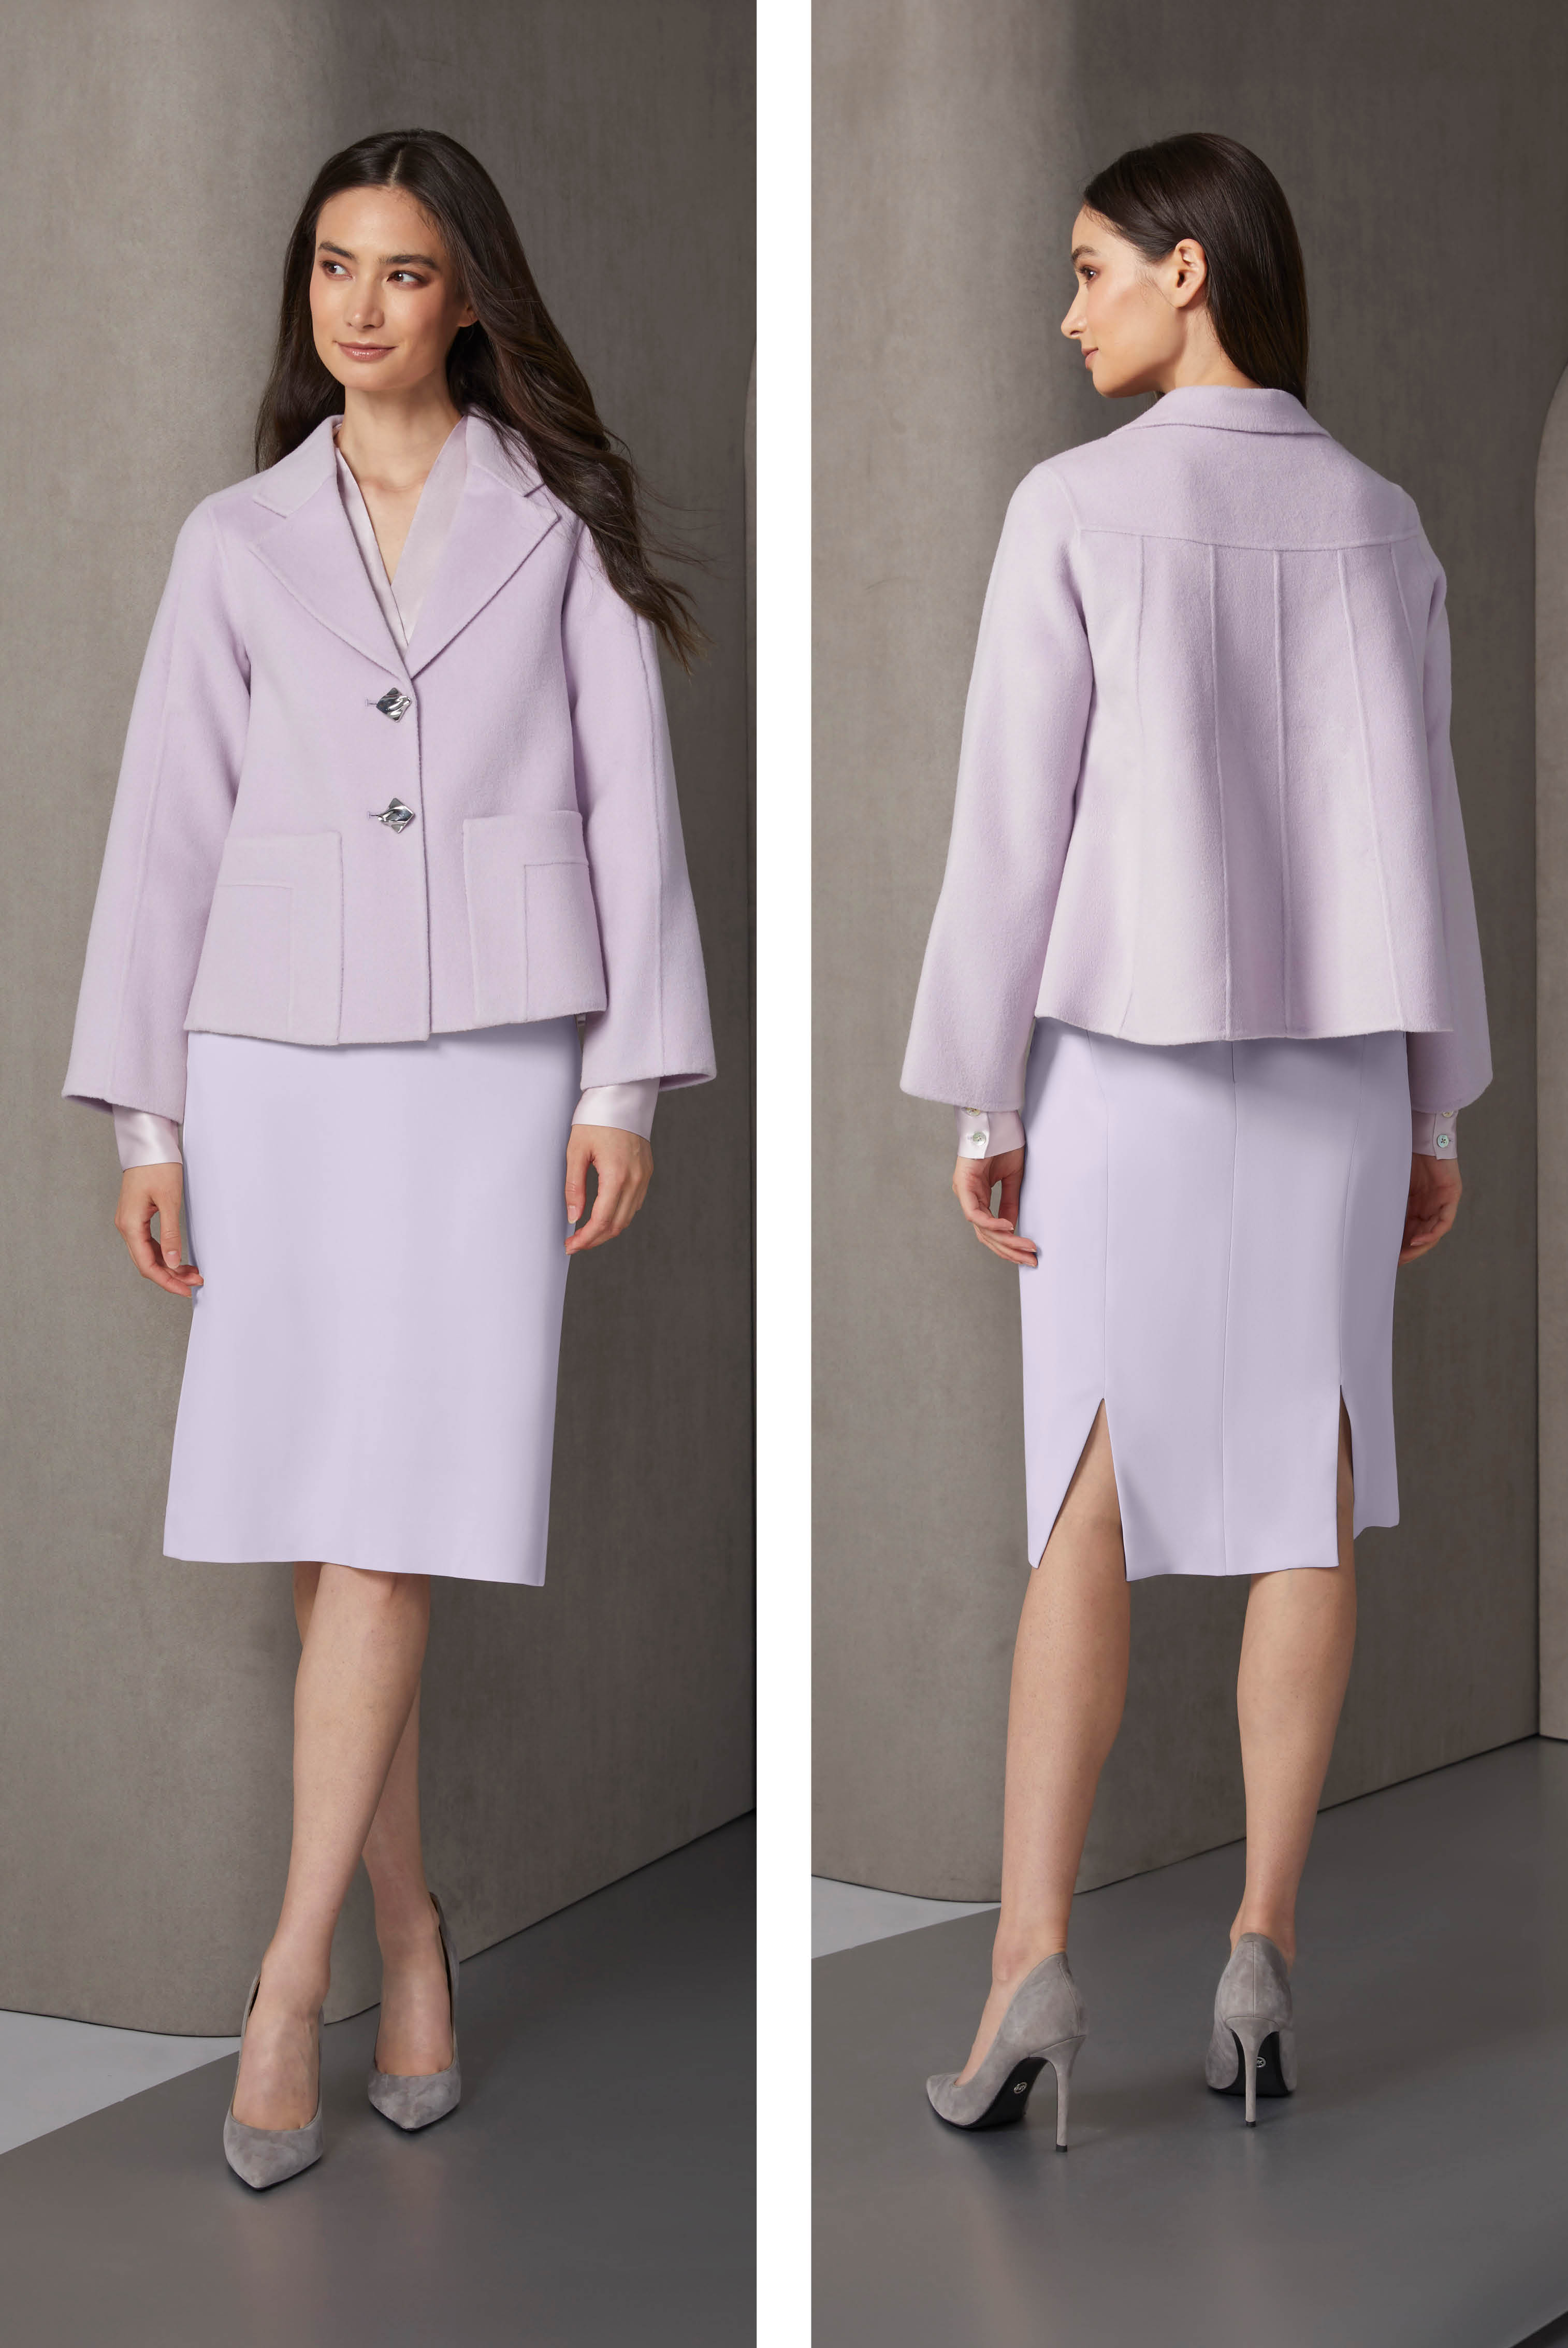 Shiny, matte, and plush textures enrich this look in a unique winter shade of lavender fog. The wooly swing jacket has front frames and multiple back seams that coordinate with the panels and double back slits of the pencil skirt.